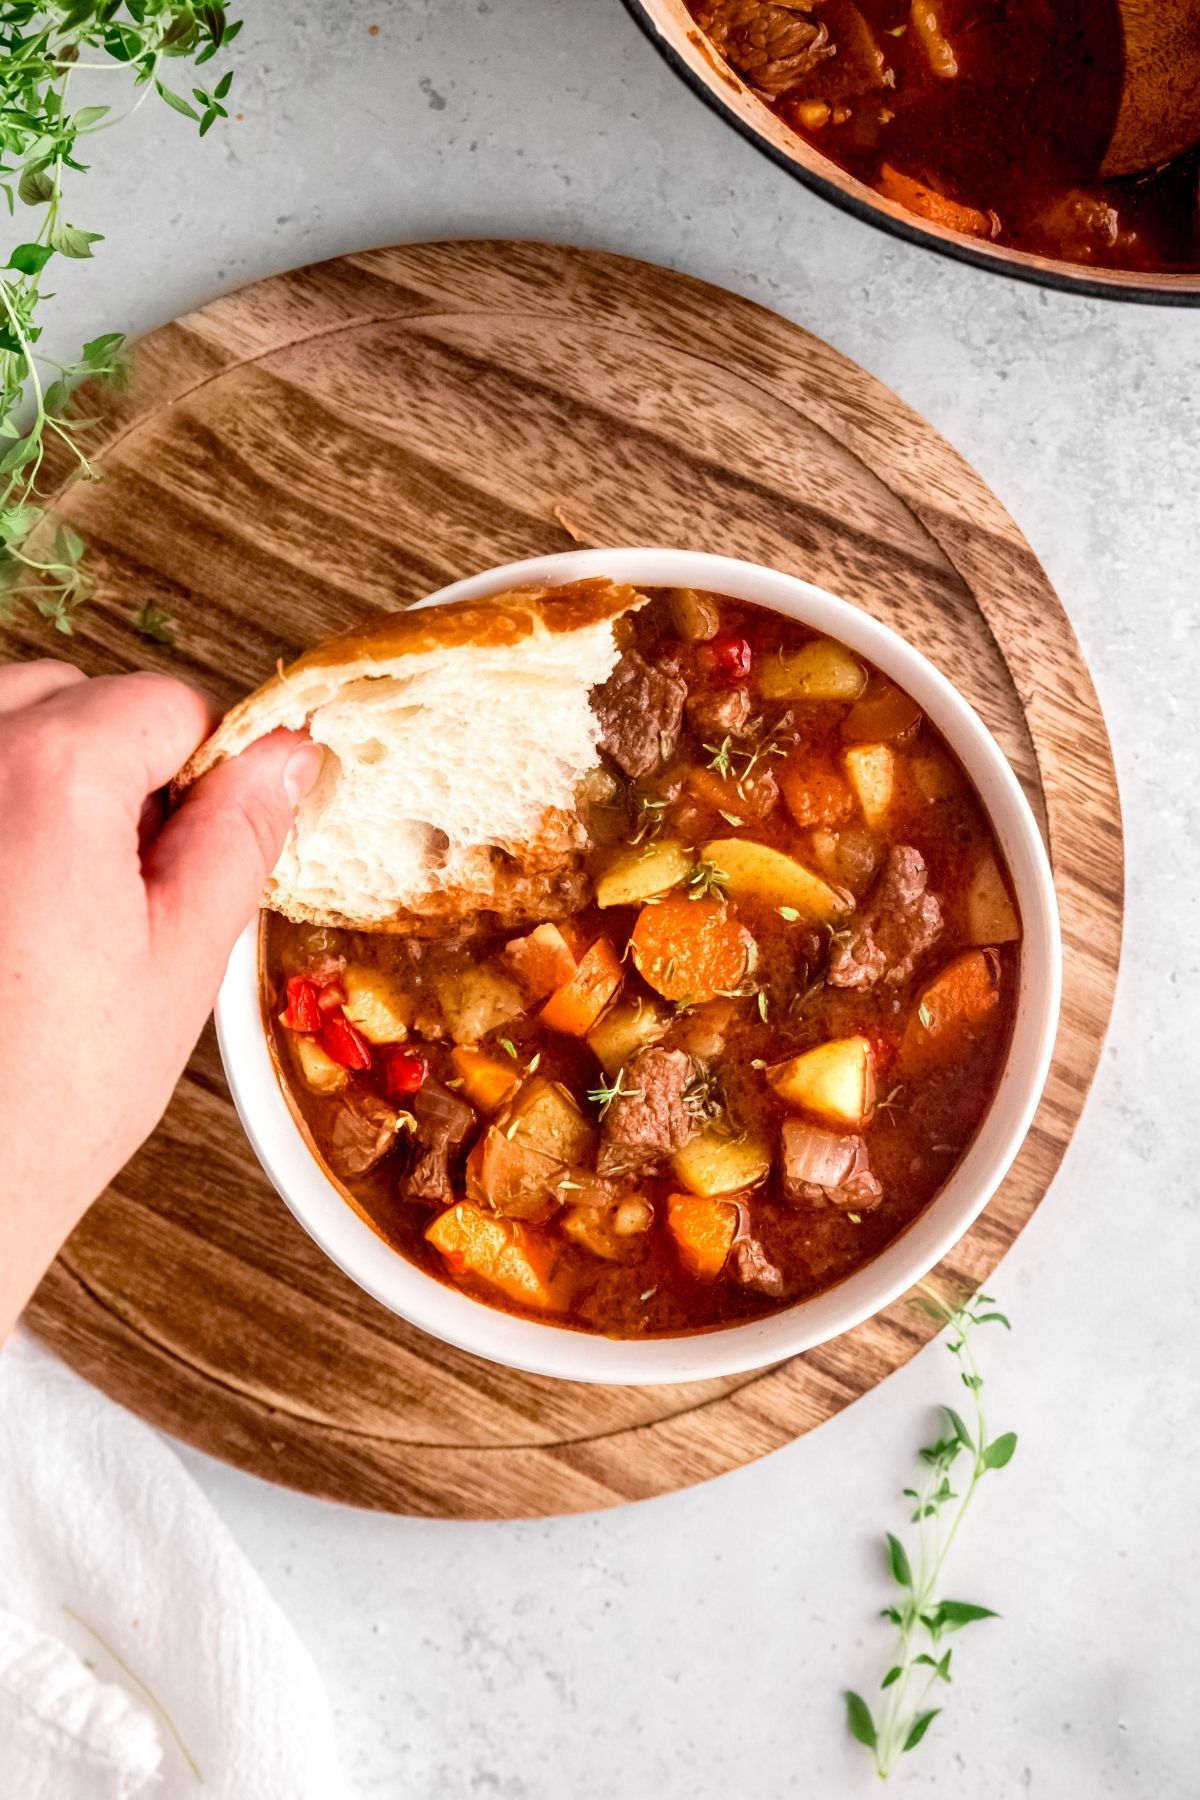 hand dunking a slice of crusty bread into the Dutch Oven Beef Stew.